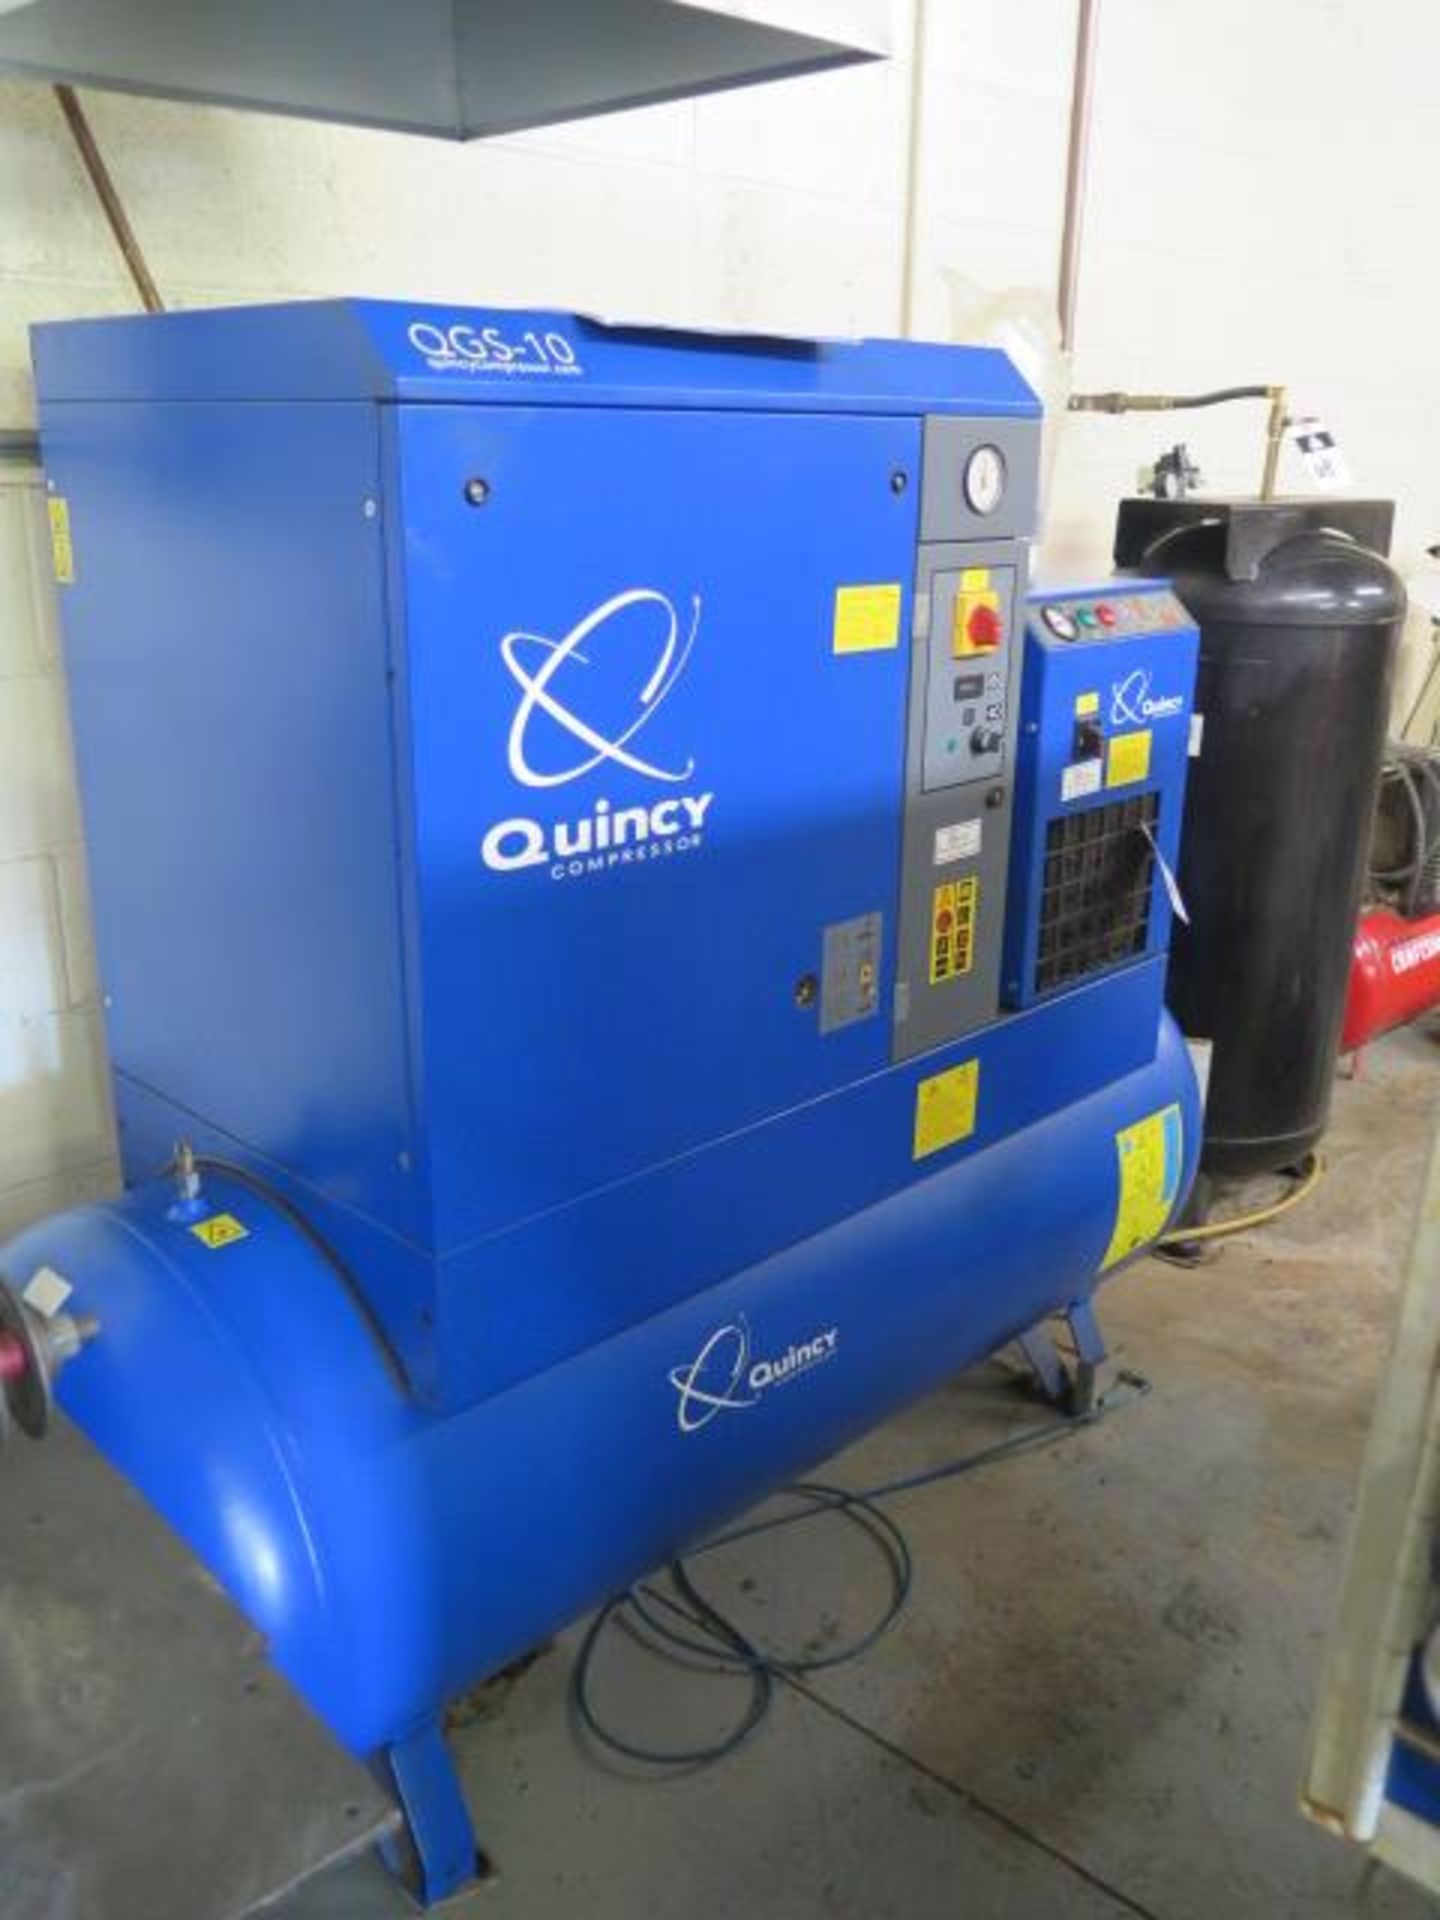 2014 Quincy QGS-10 D CSA/UL Rotary Compressor s/n CAI760874 w/ Built-In Refr Air Dryer, SOLD AS IS - Image 2 of 7